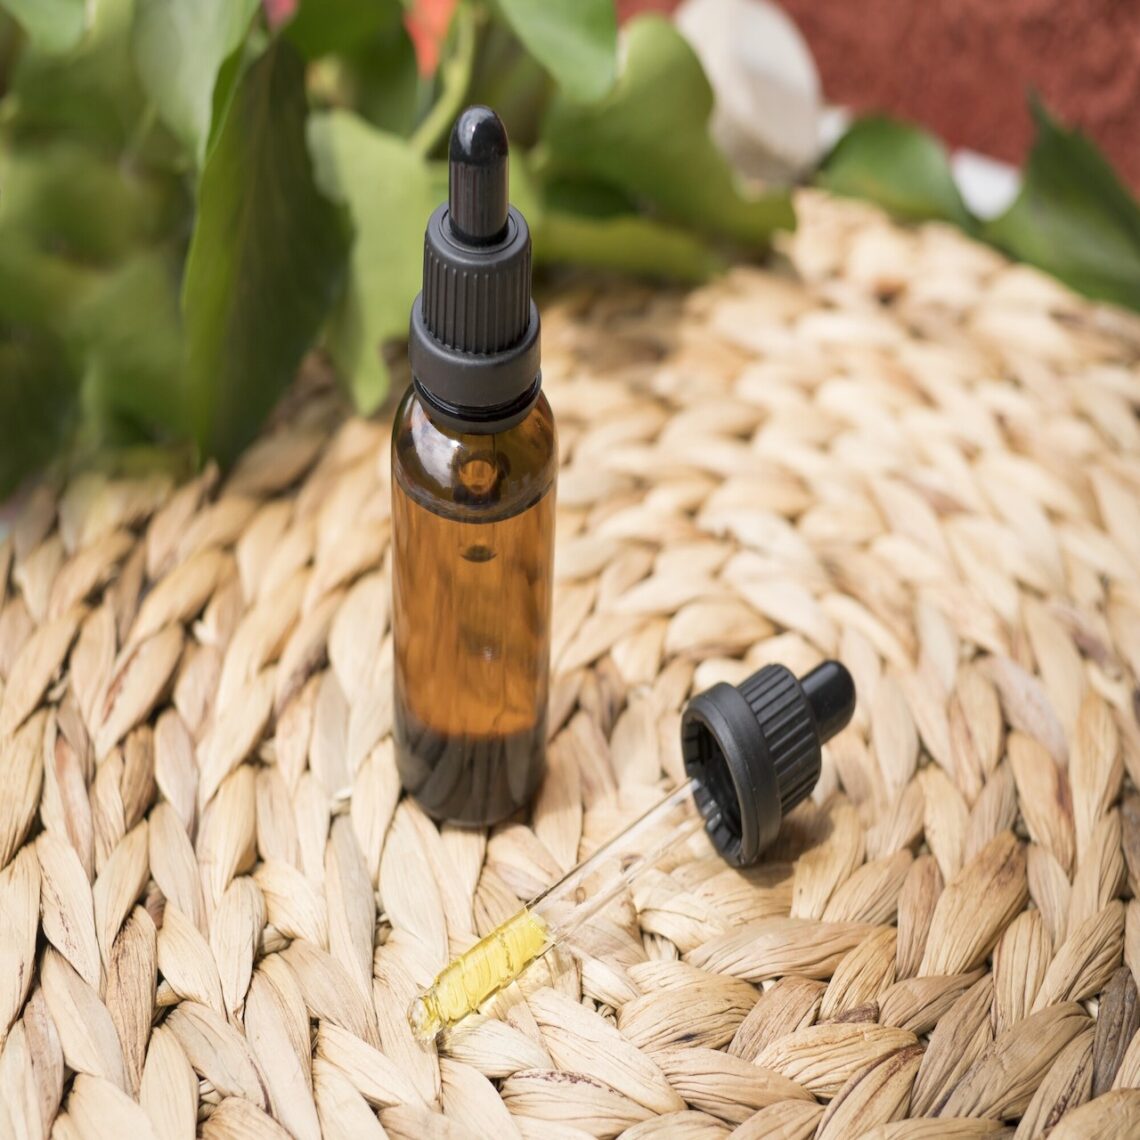 CBD Oil vs. Hemp Oil: What's the Difference Between the Two?